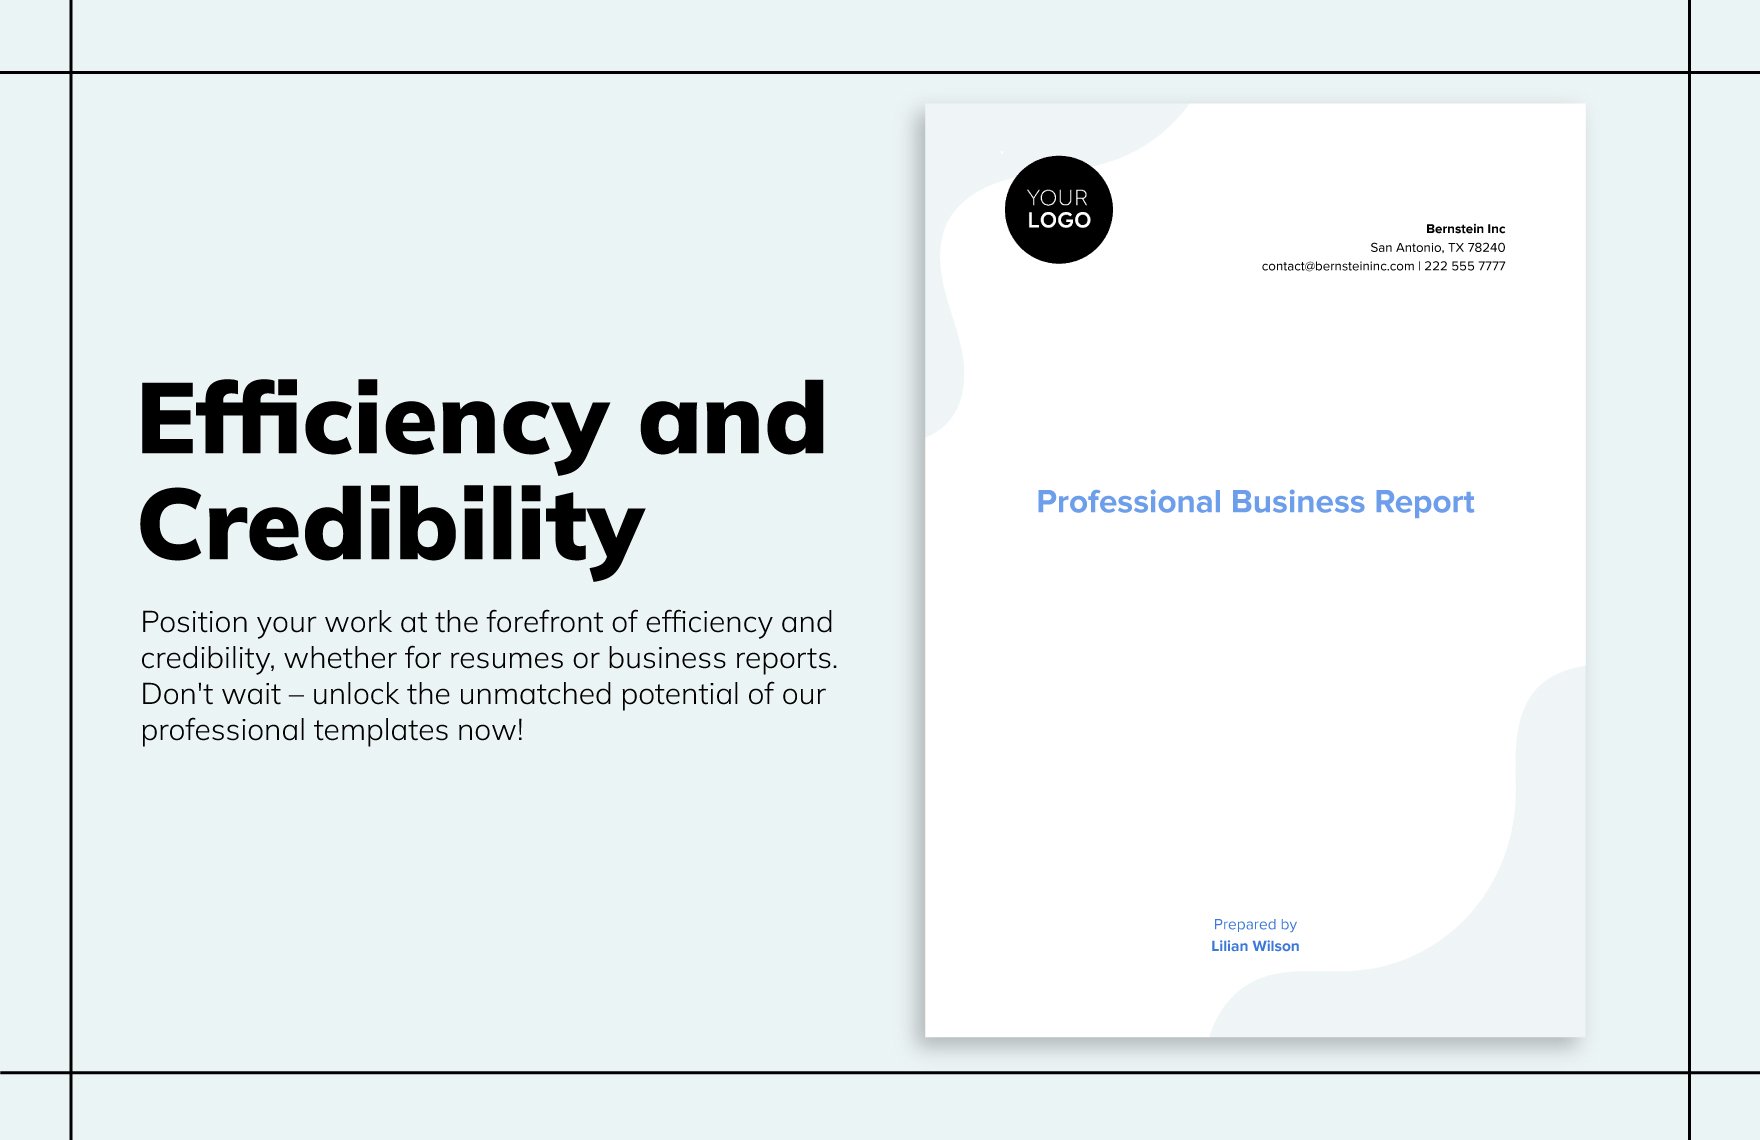 Professional Business Report Template